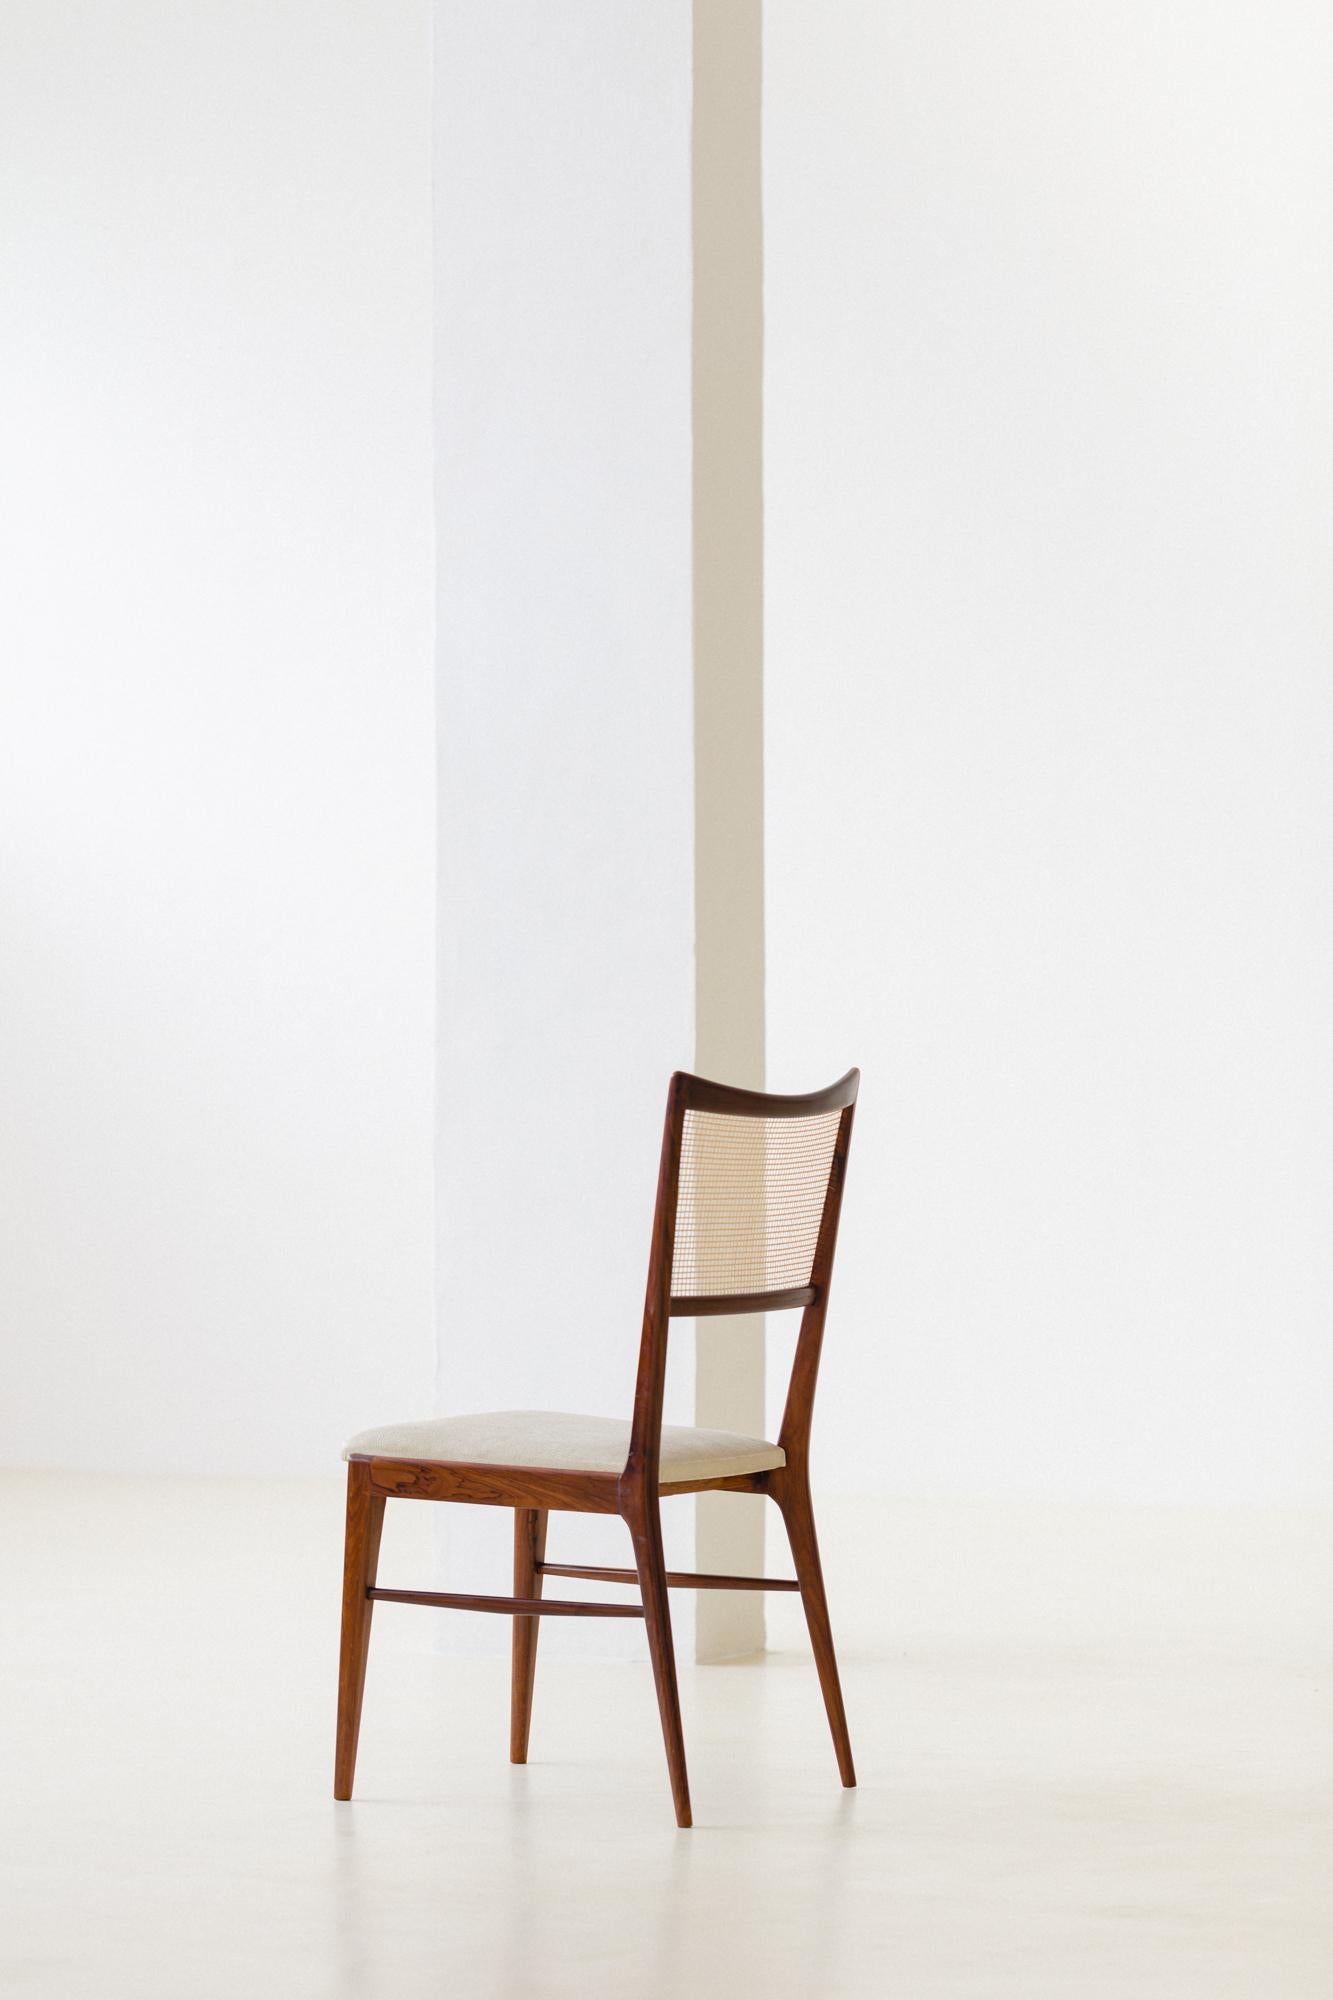 Set of 10 Rosewood and Cane Dining Chairs, Unknown Designer, 1950s For Sale 1